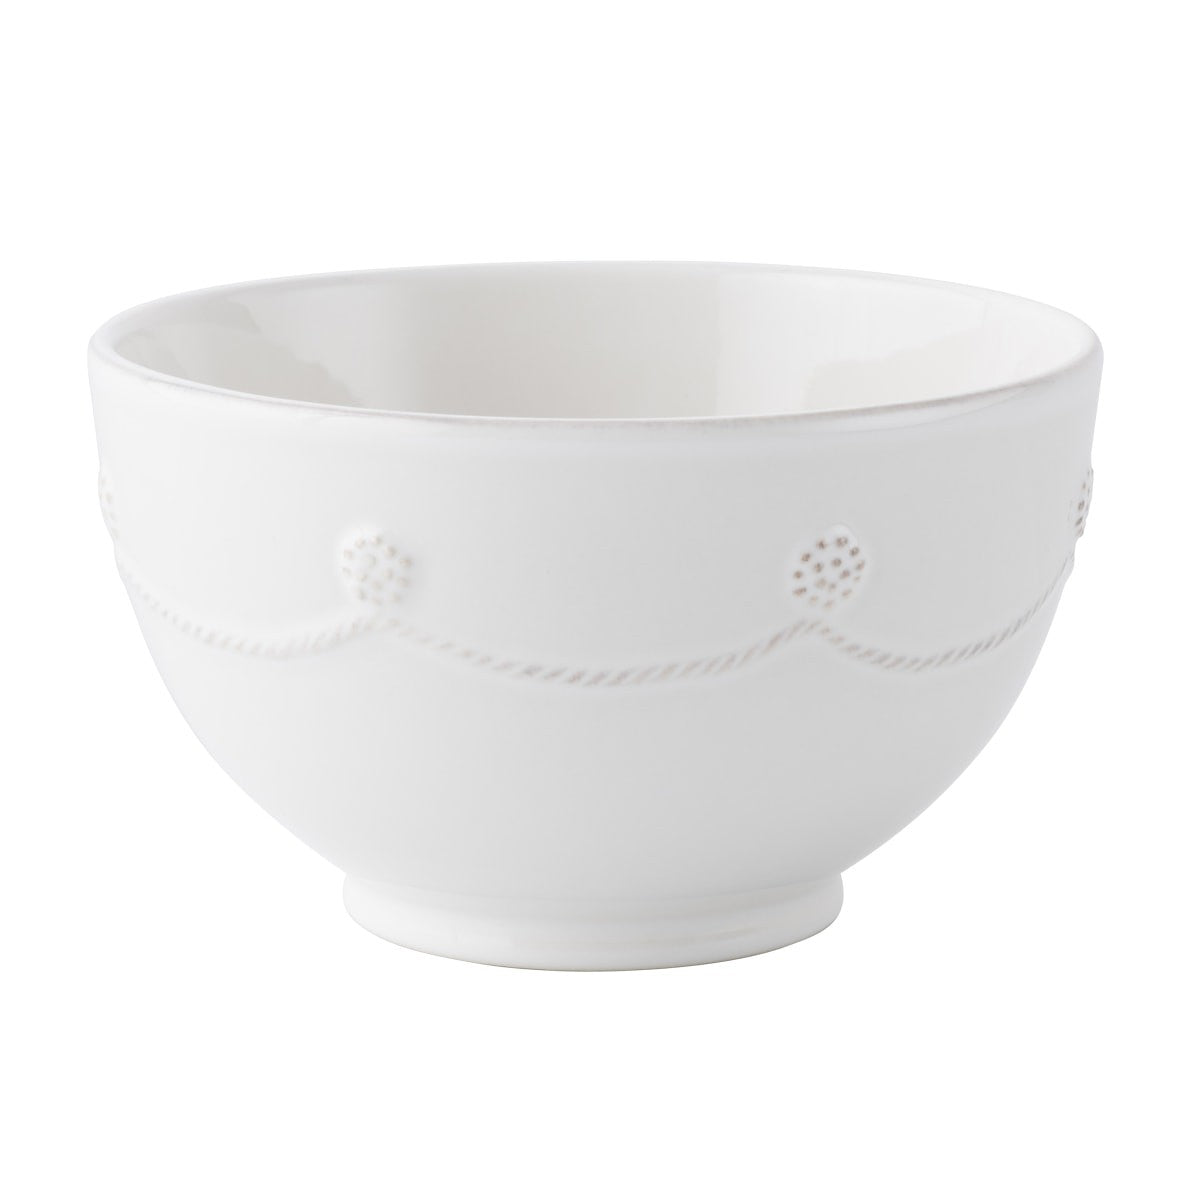 berry and thread cereal bowl on a white background